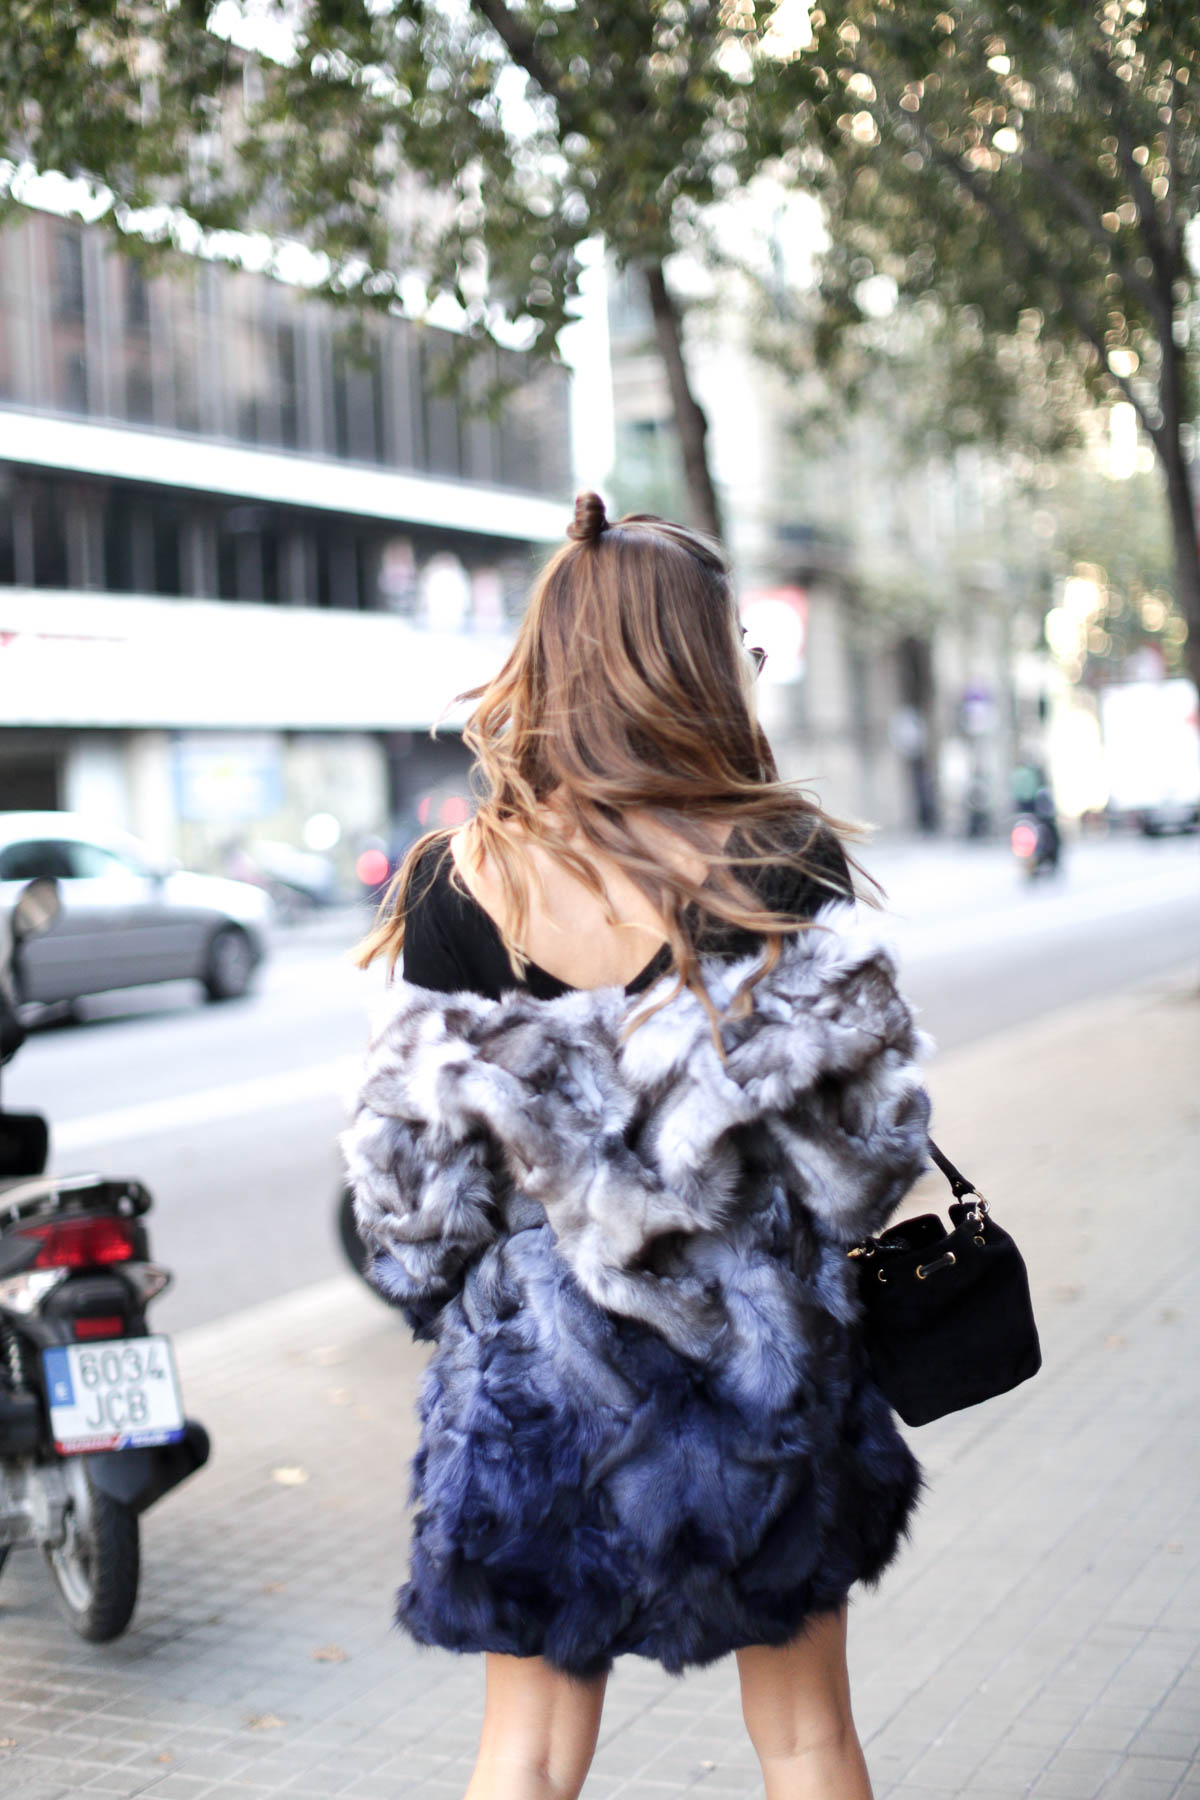 barcelona-fur-cuple-mini-skirt-ankle-boots-streetstyle-look-bartabac-outfit-moda-blogger-13